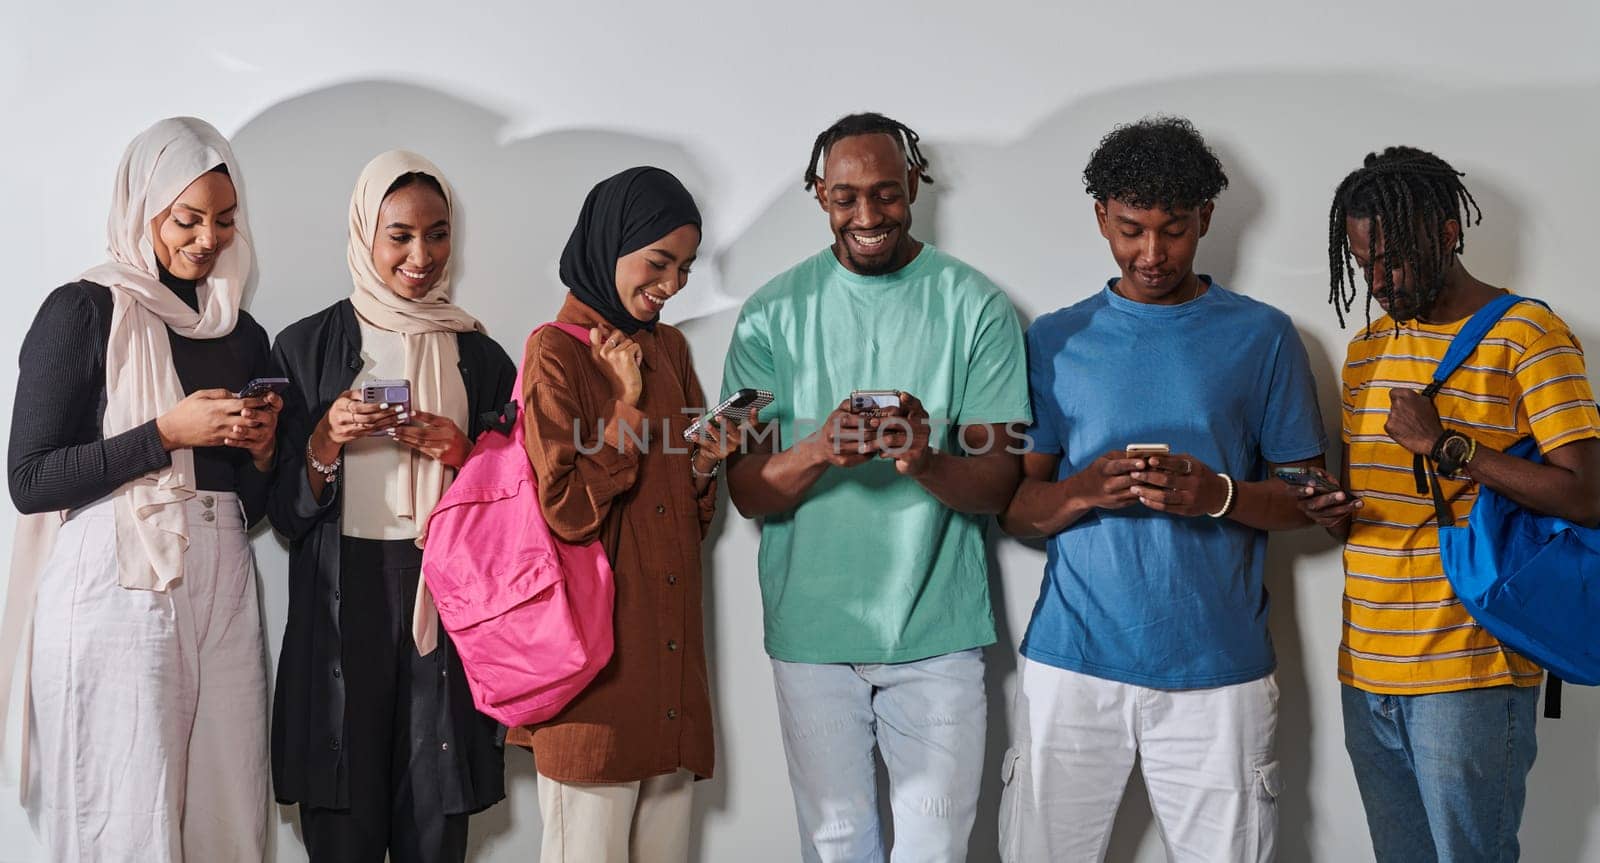 A diverse group of students, immersed in the digital age, stands united while engaging with their smartphones against a white backdrop, symbolizing the modern era of connectivity, communication, and collaborative learning by dotshock